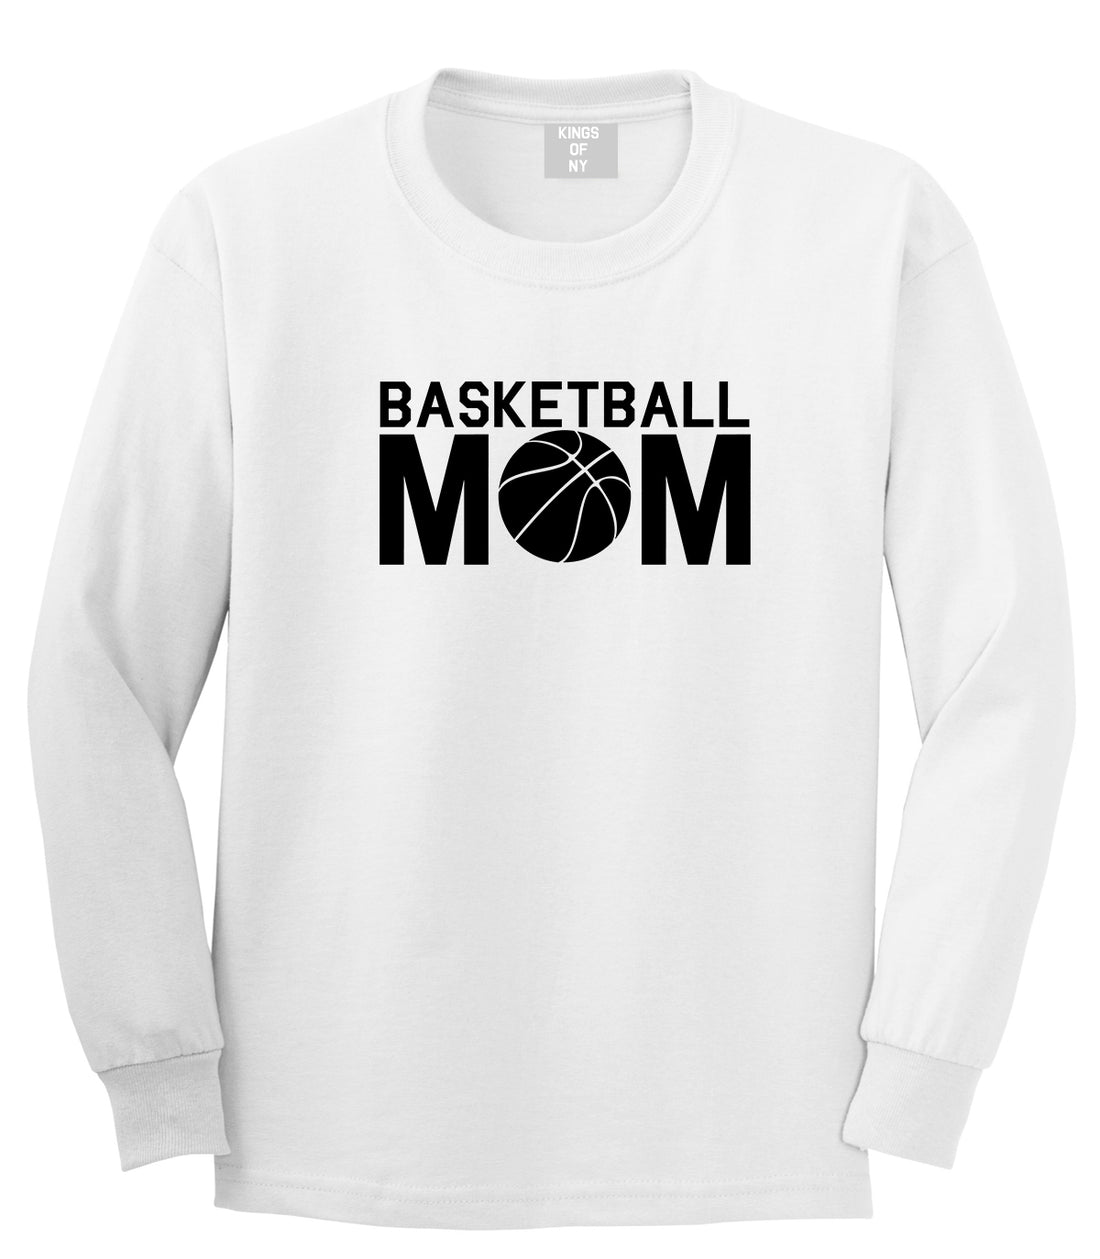 Basketball Mom White Long Sleeve T-Shirt by Kings Of NY